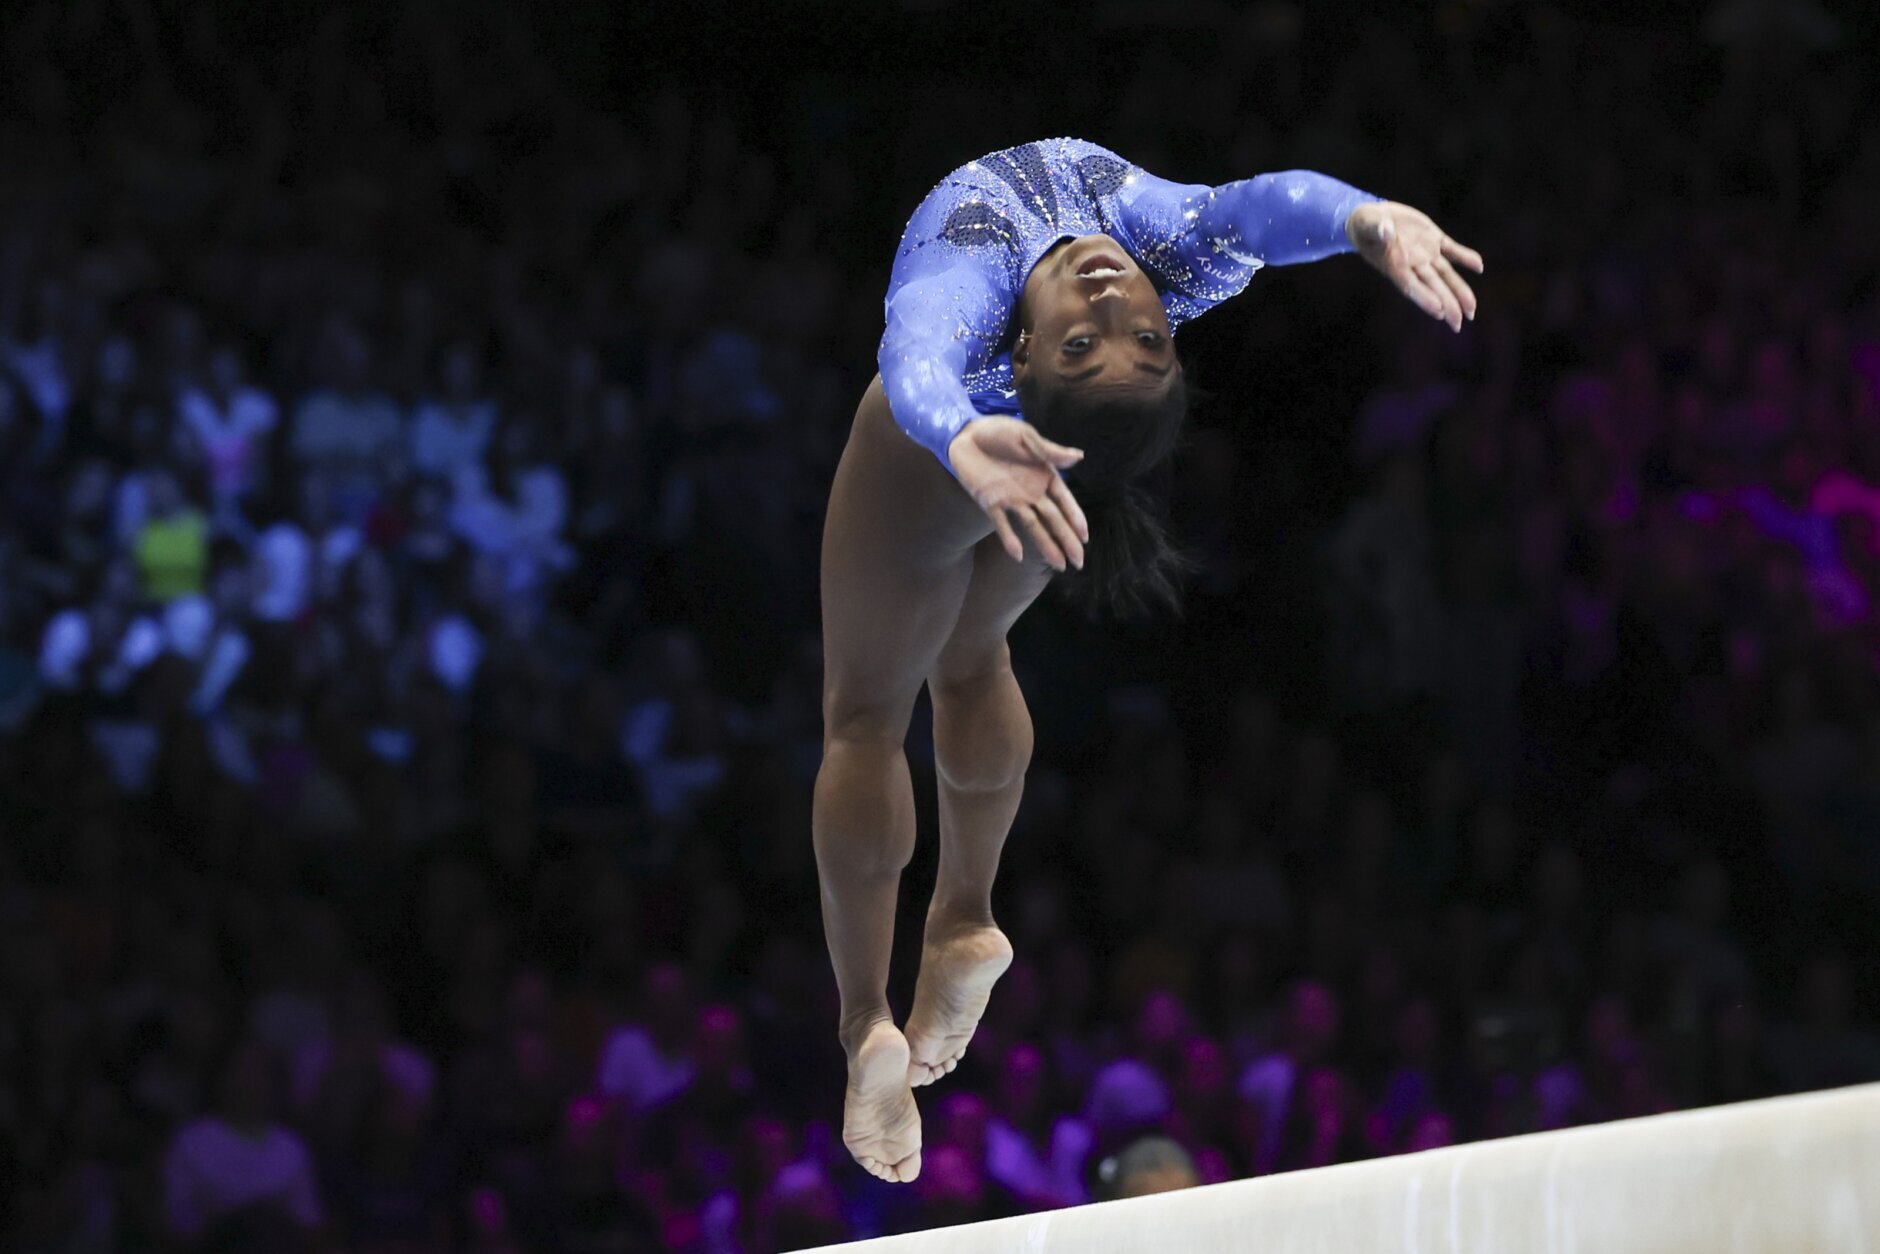 Simone Biles Makes History With Sixth All-Around Title, Becomes Most Decorated Gymnast Ever